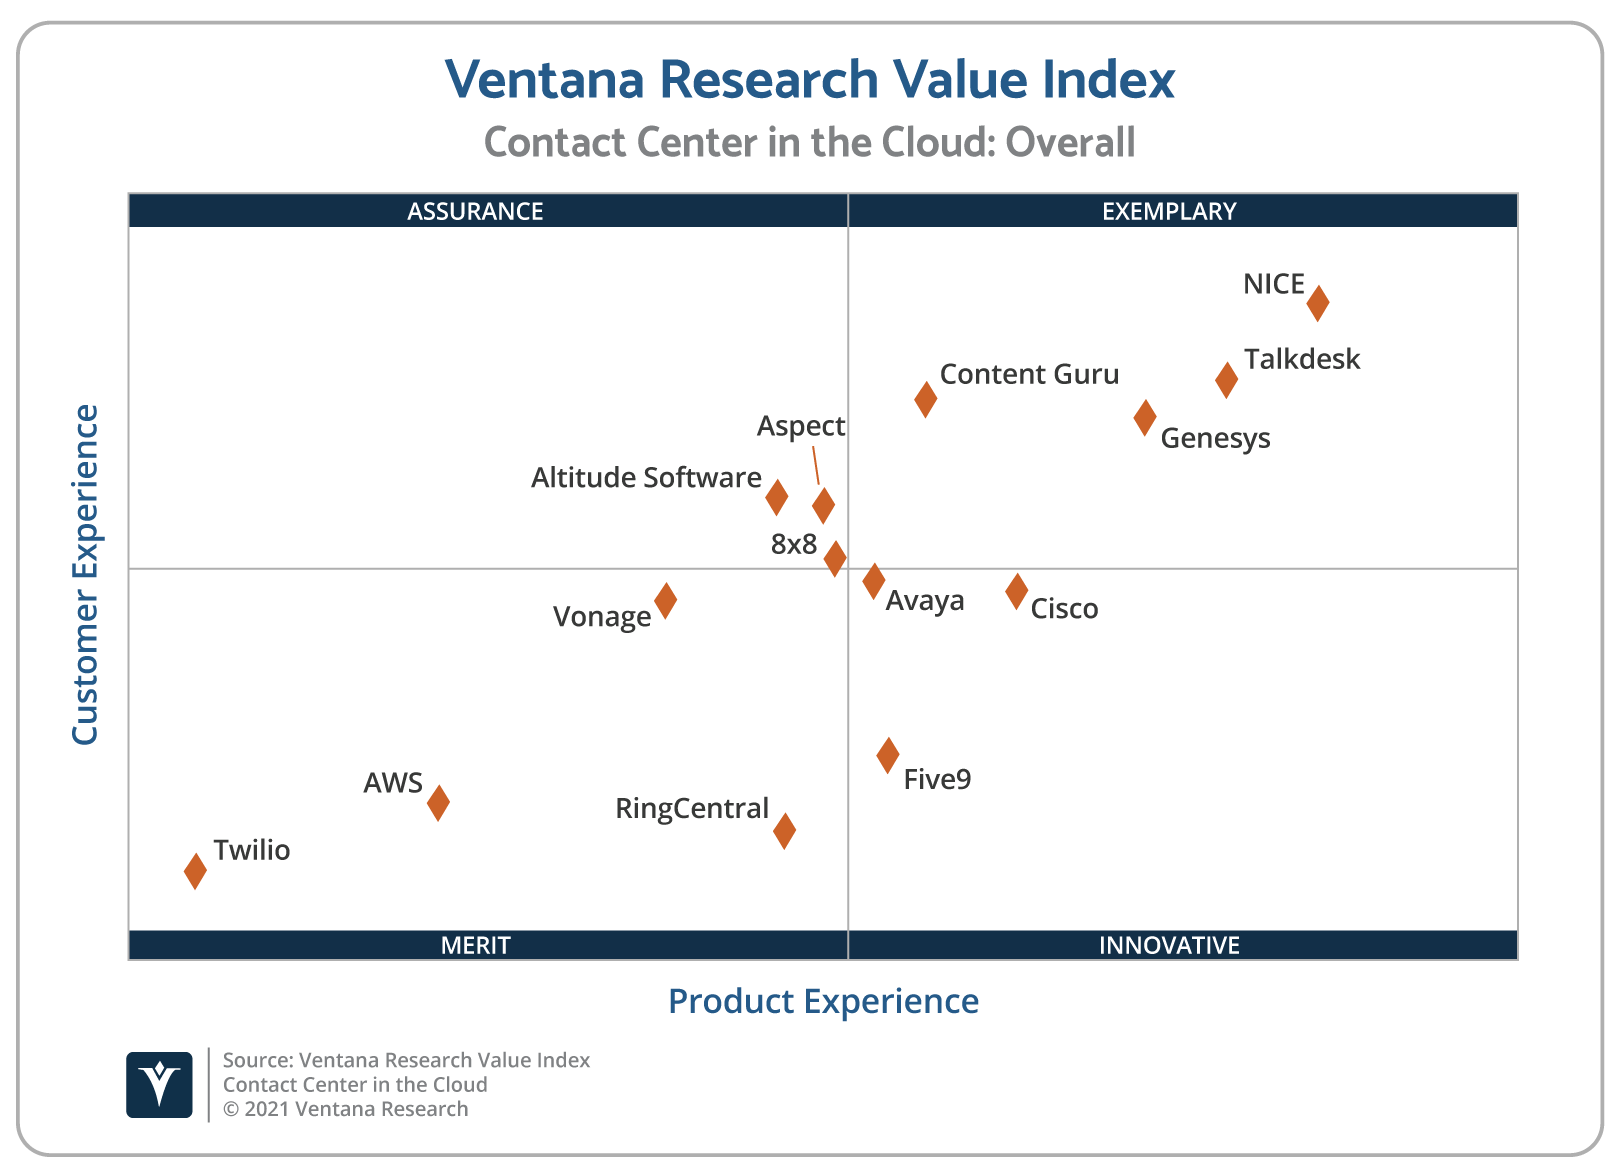 Ventana_Research_Value_Index_Contact_Center_in_the_Cloud_2021_Scatter (1)